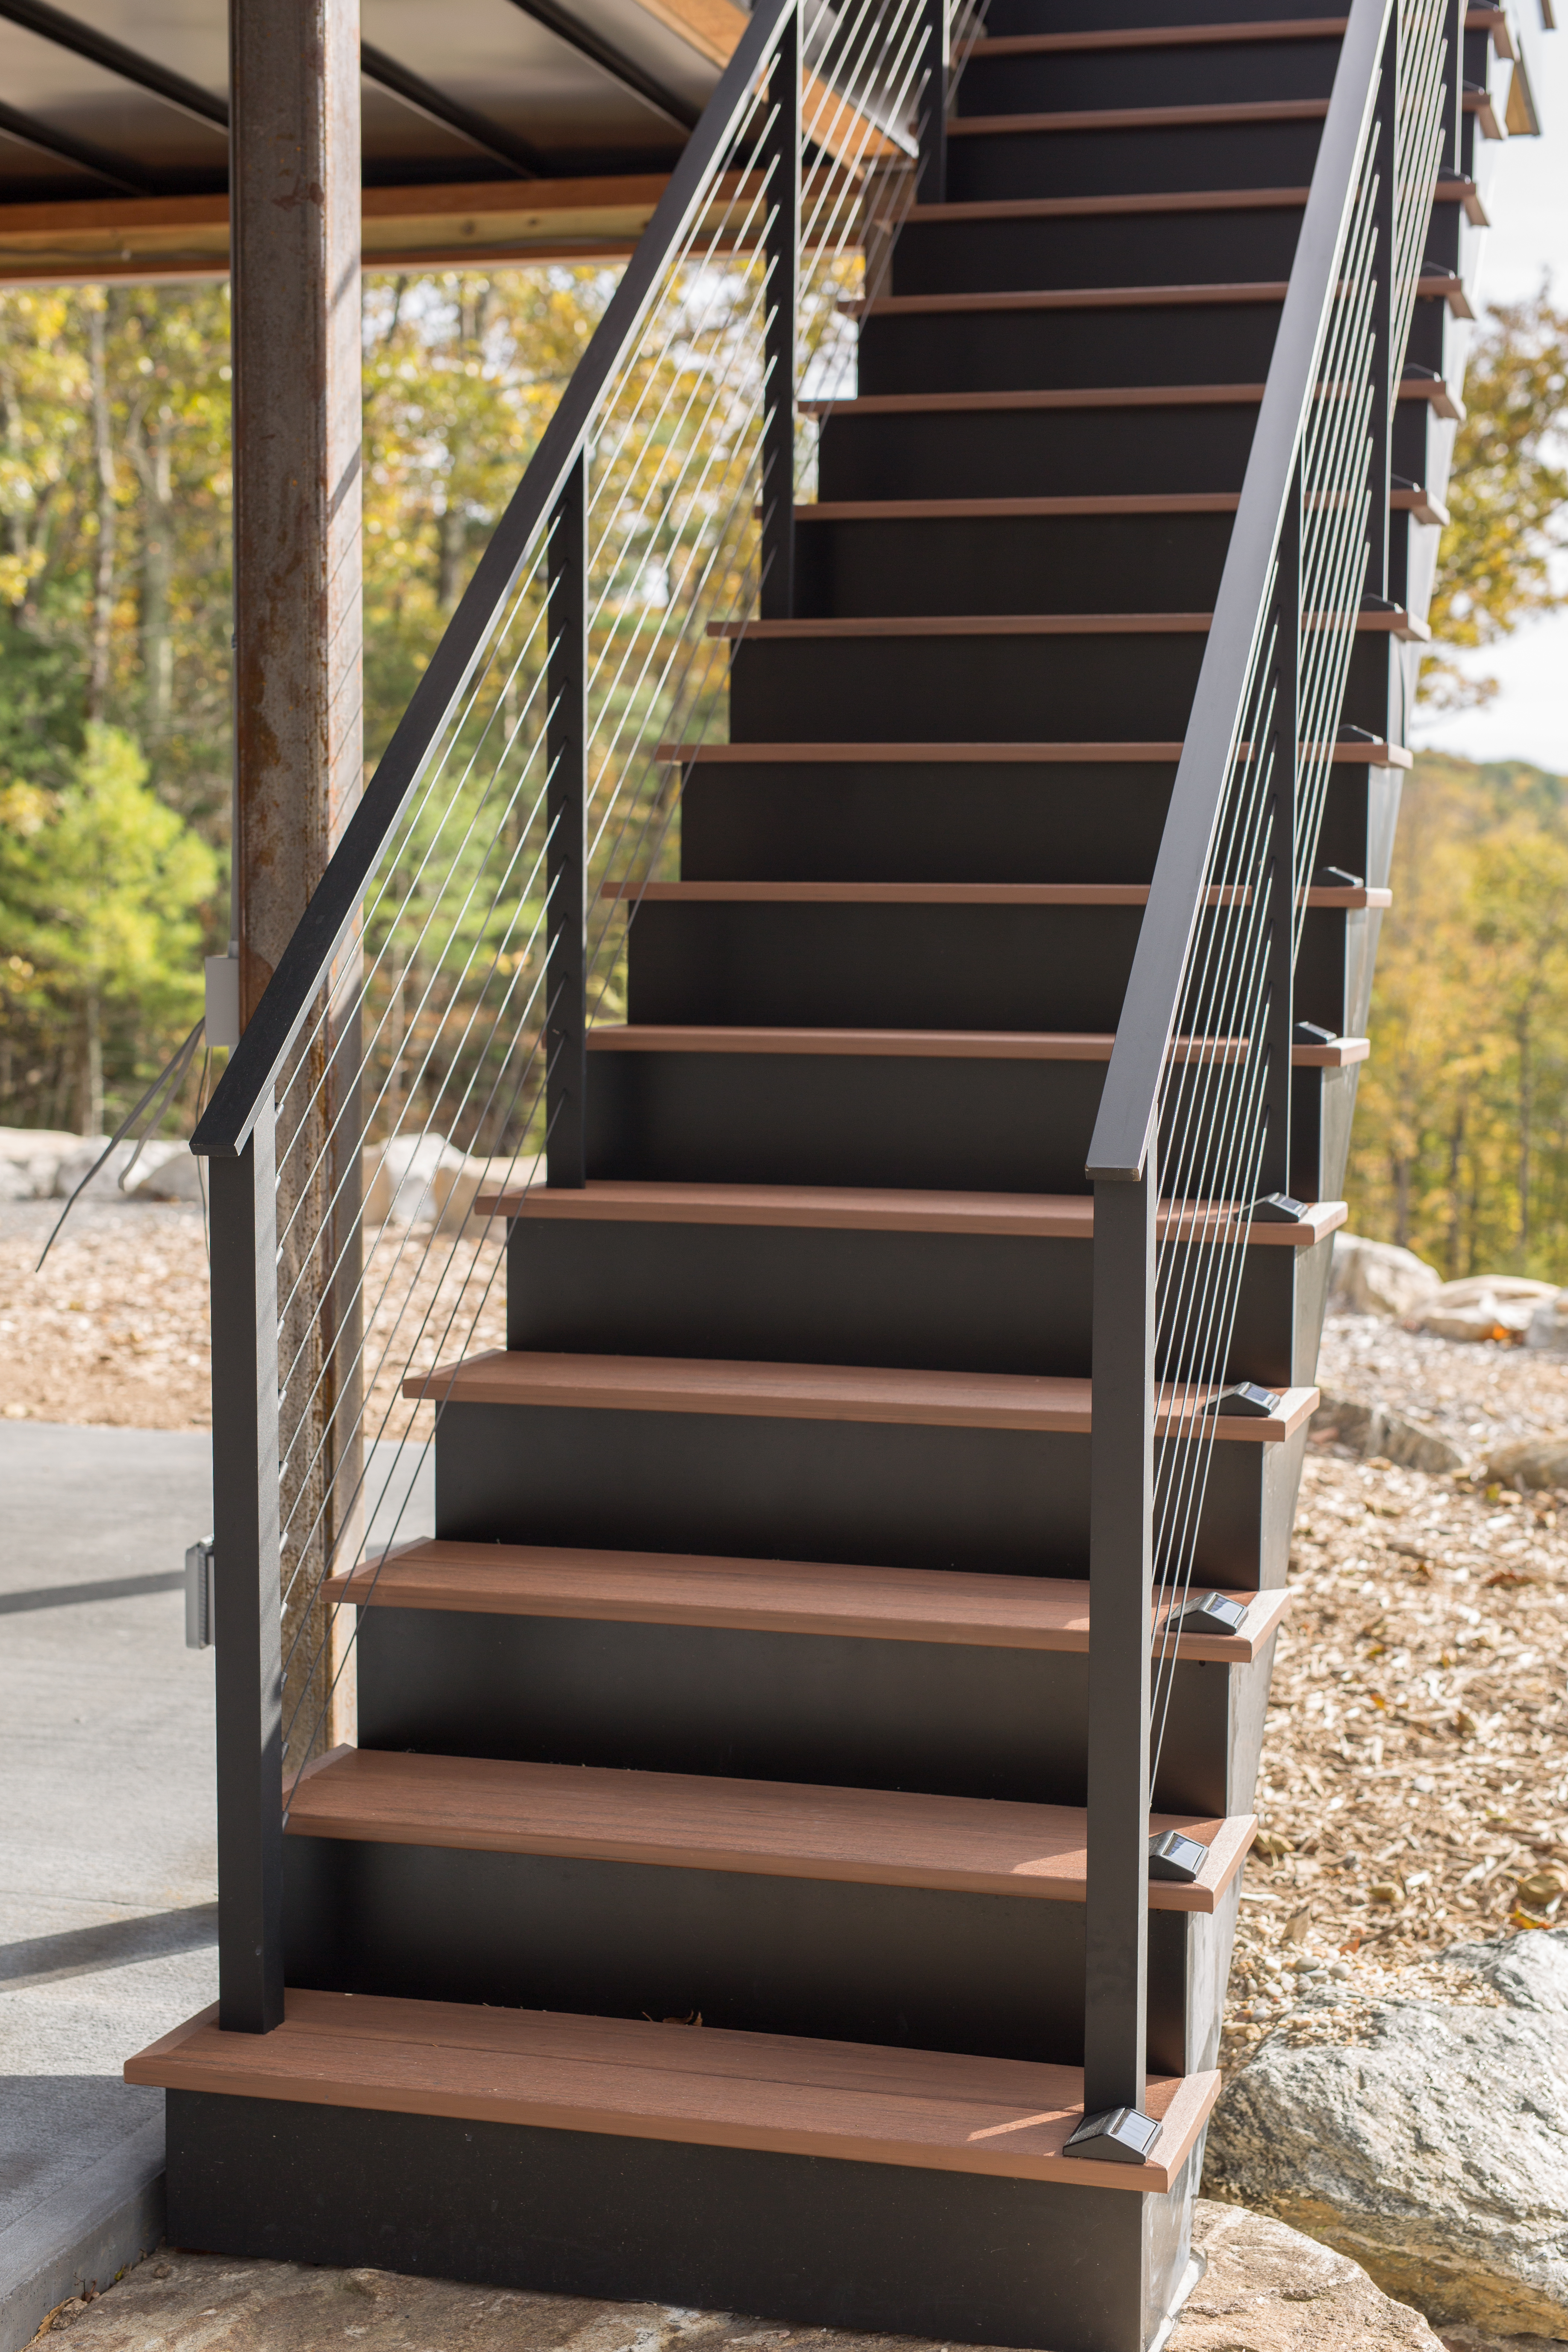 Exterior Deck staircase with black railing system